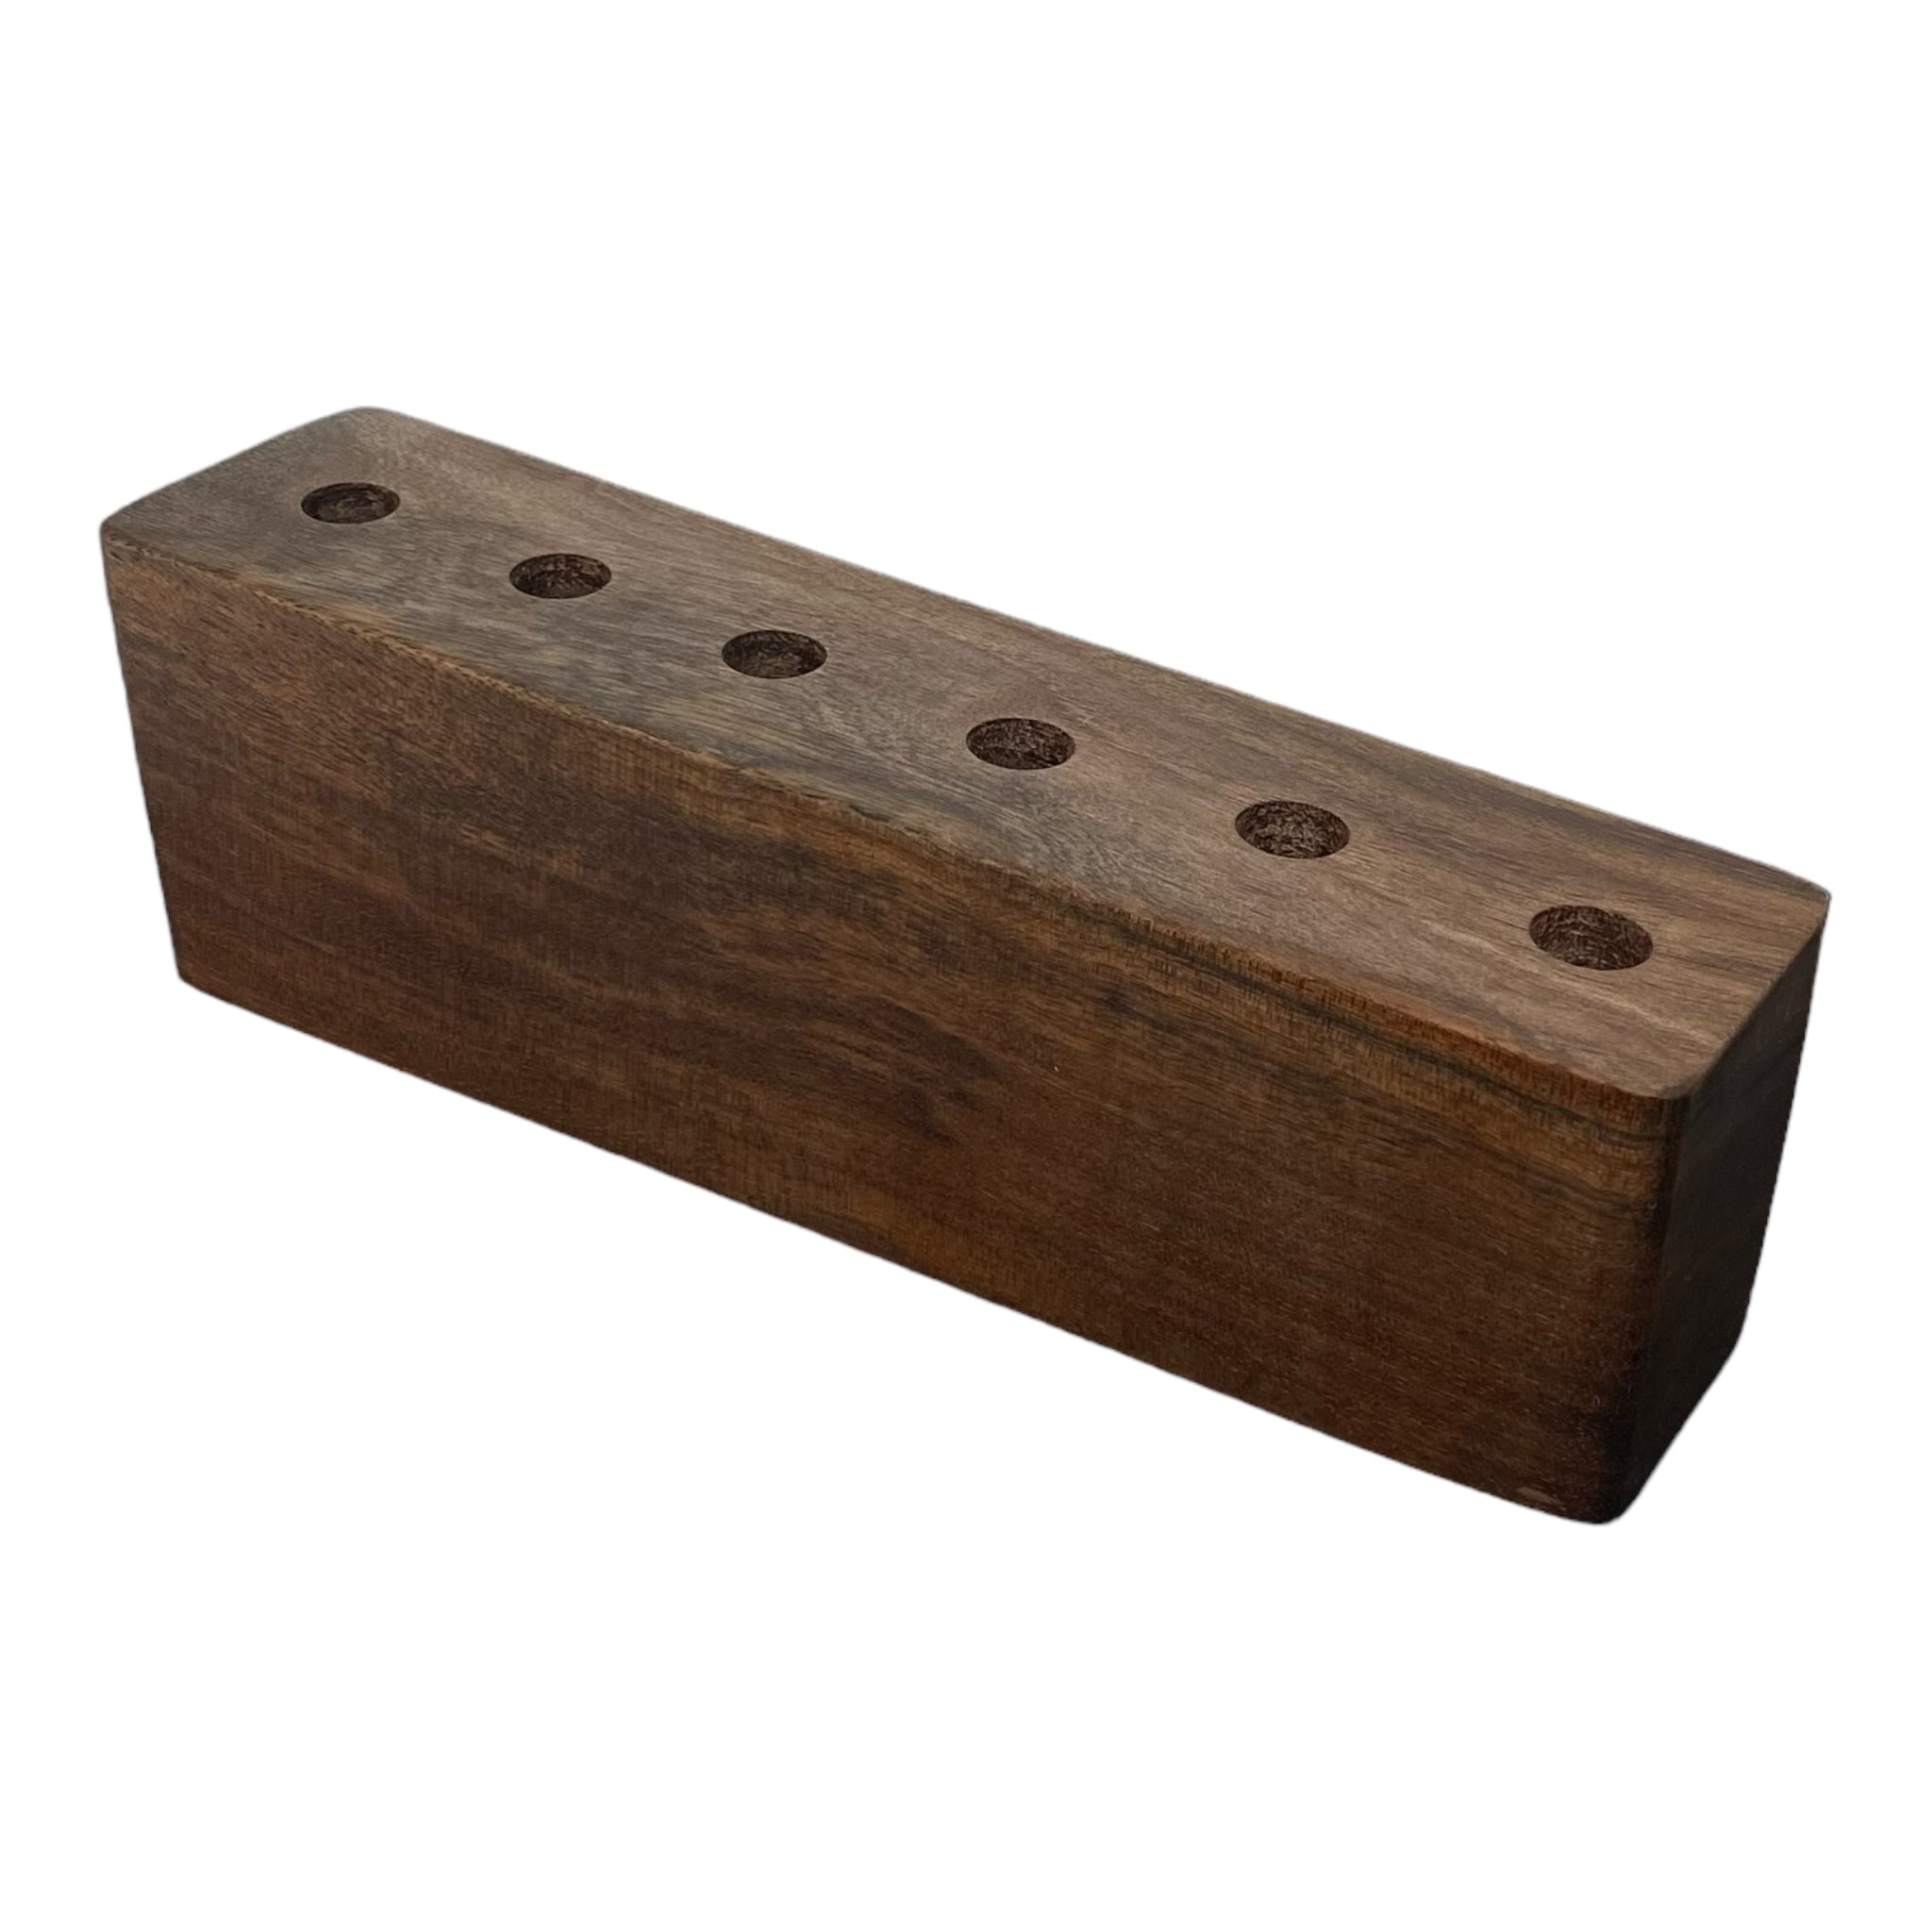 6 Hole Wood Display Stand Holder For 14mm Bong Bowl Pieces Or Quartz Bangers - Black Walnut